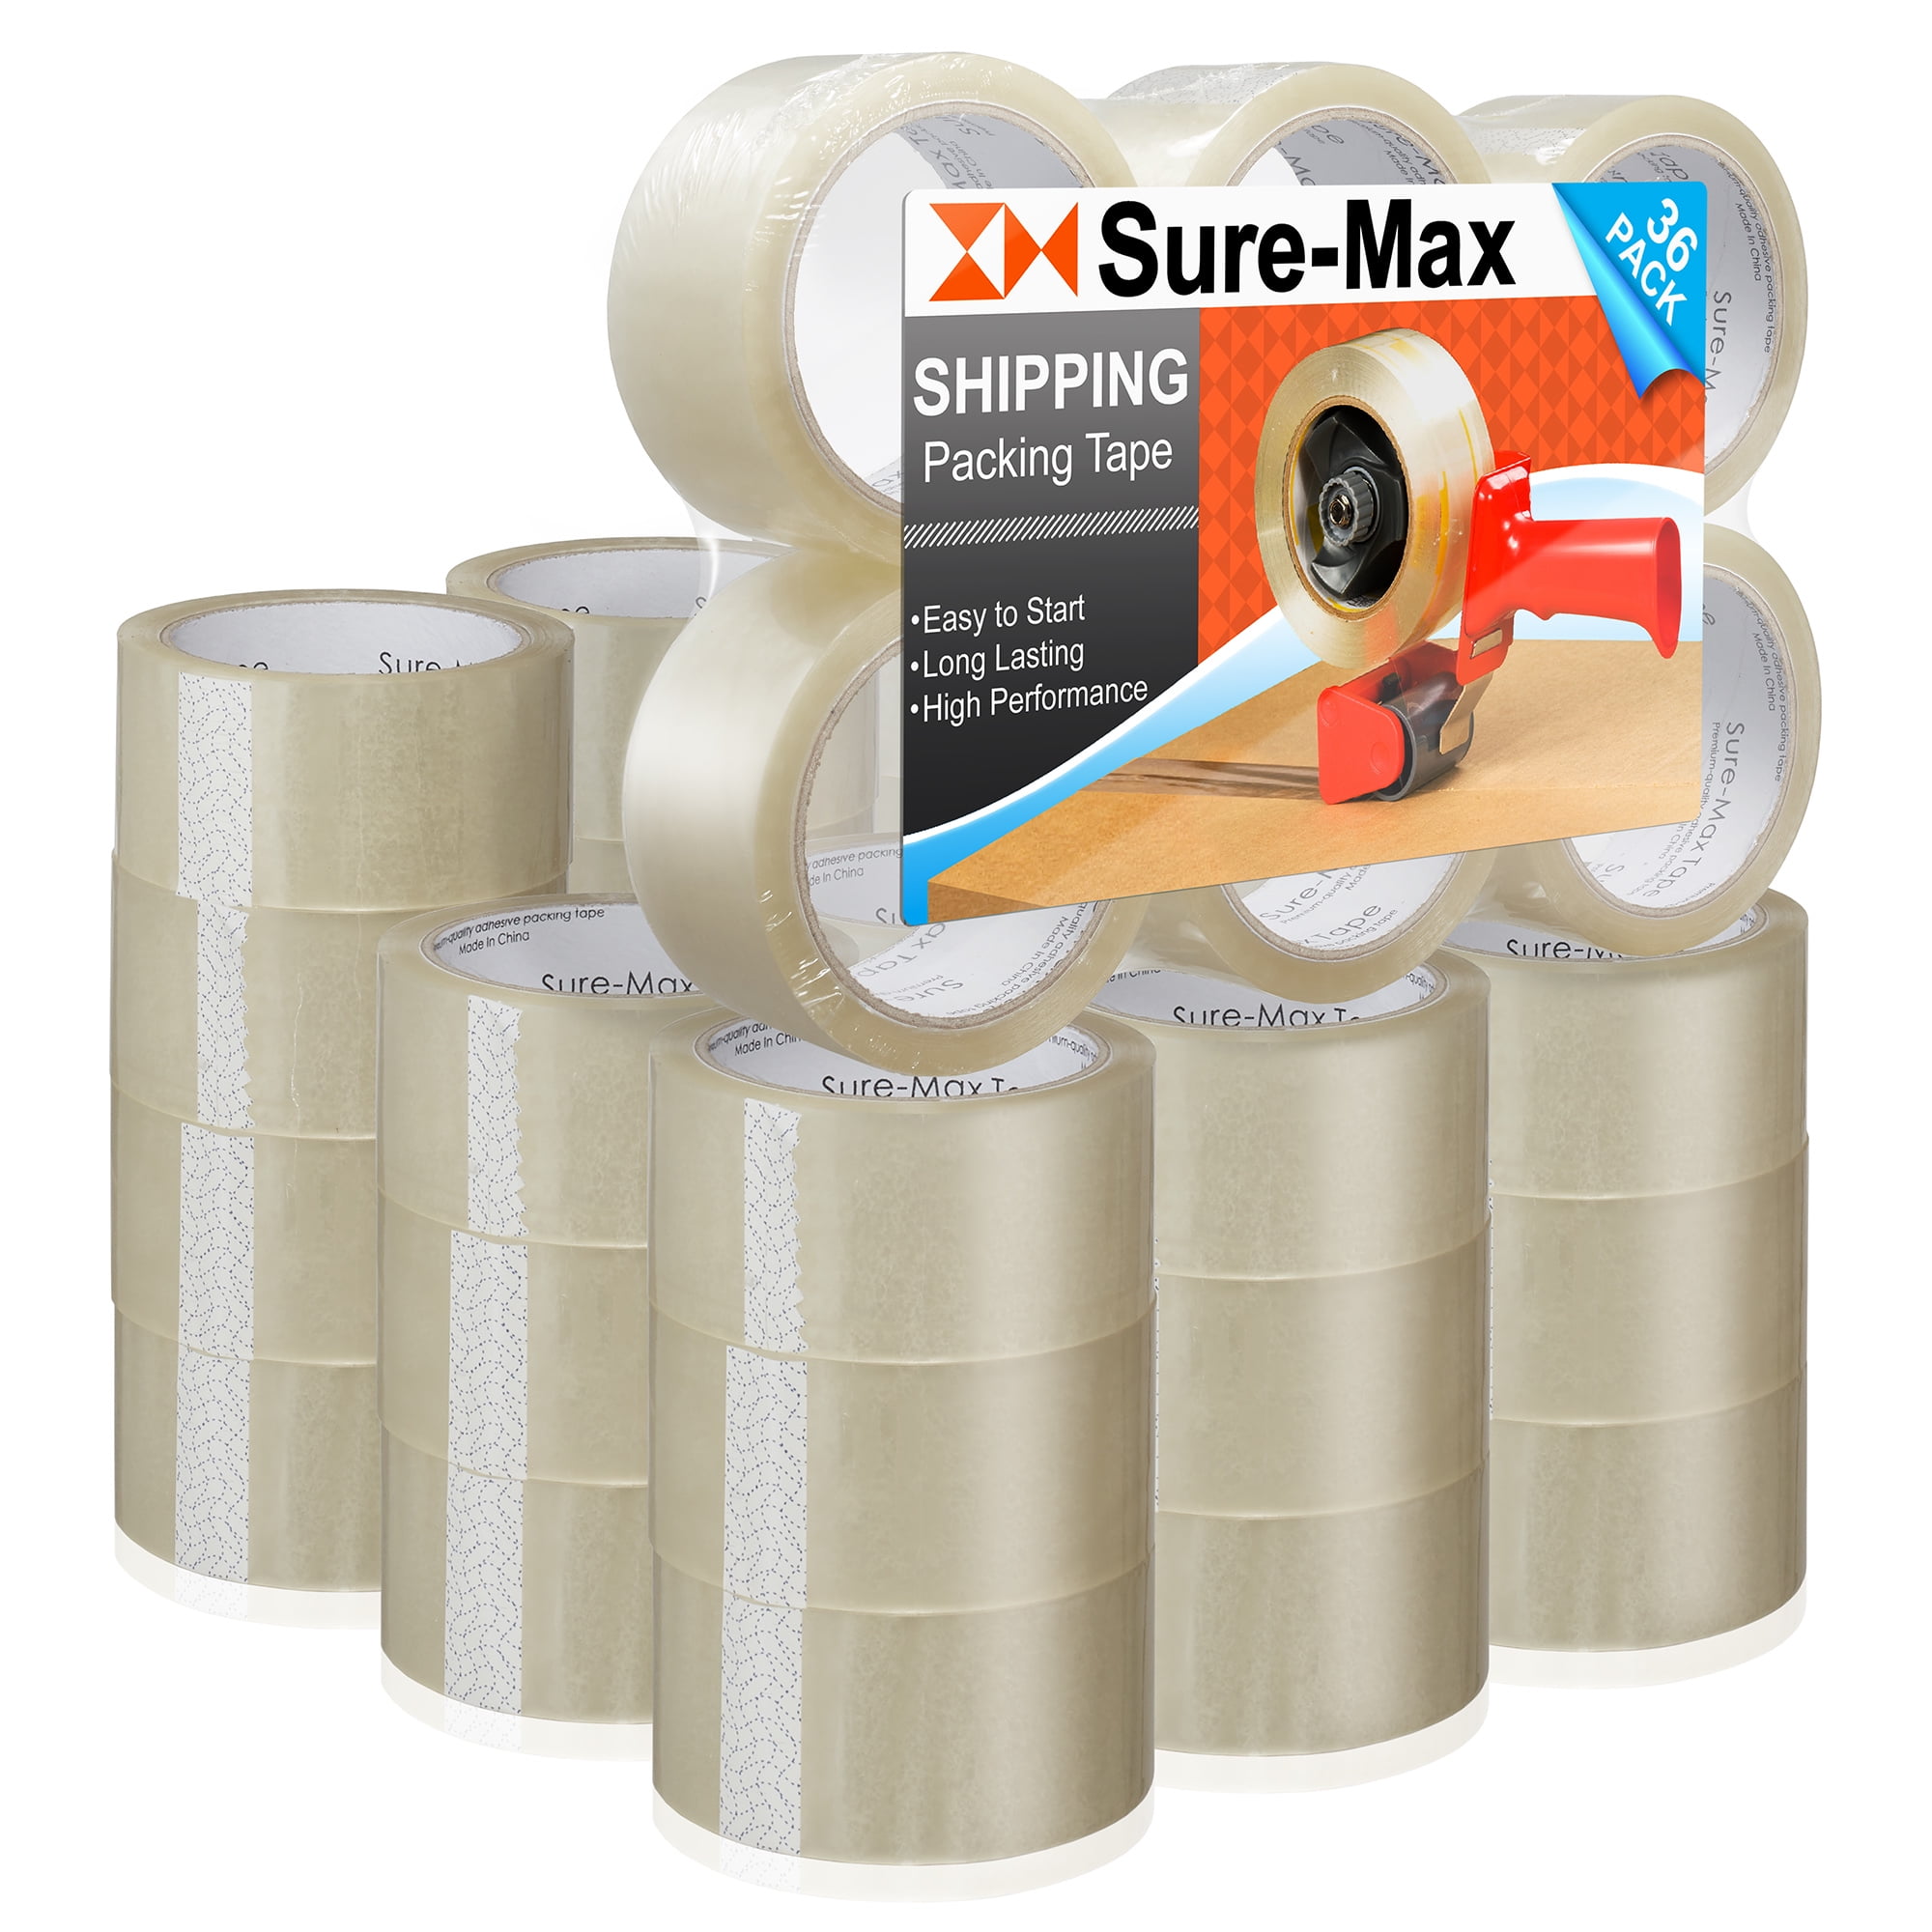 Scotch, Office, 4 New Rolls Of Packt Paper Packing Tape By Scotch